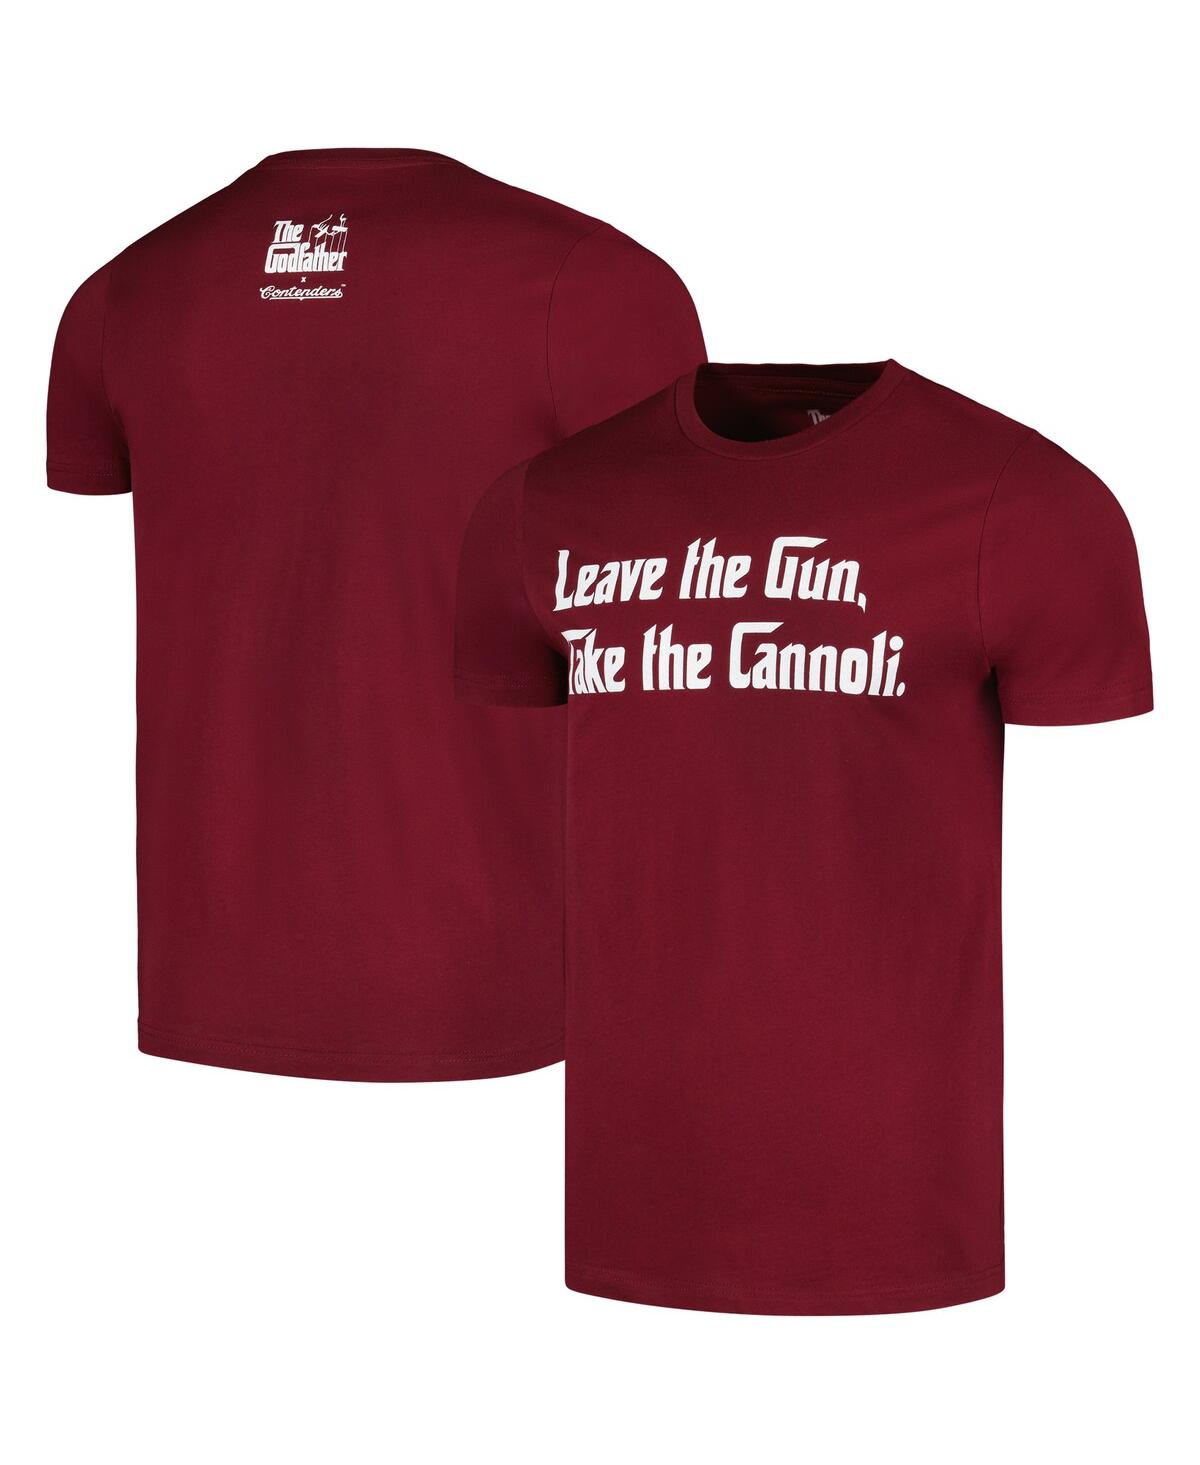 Contenders Clothing Men's And Women's  Red The Godfather The Cannoli T-shirt